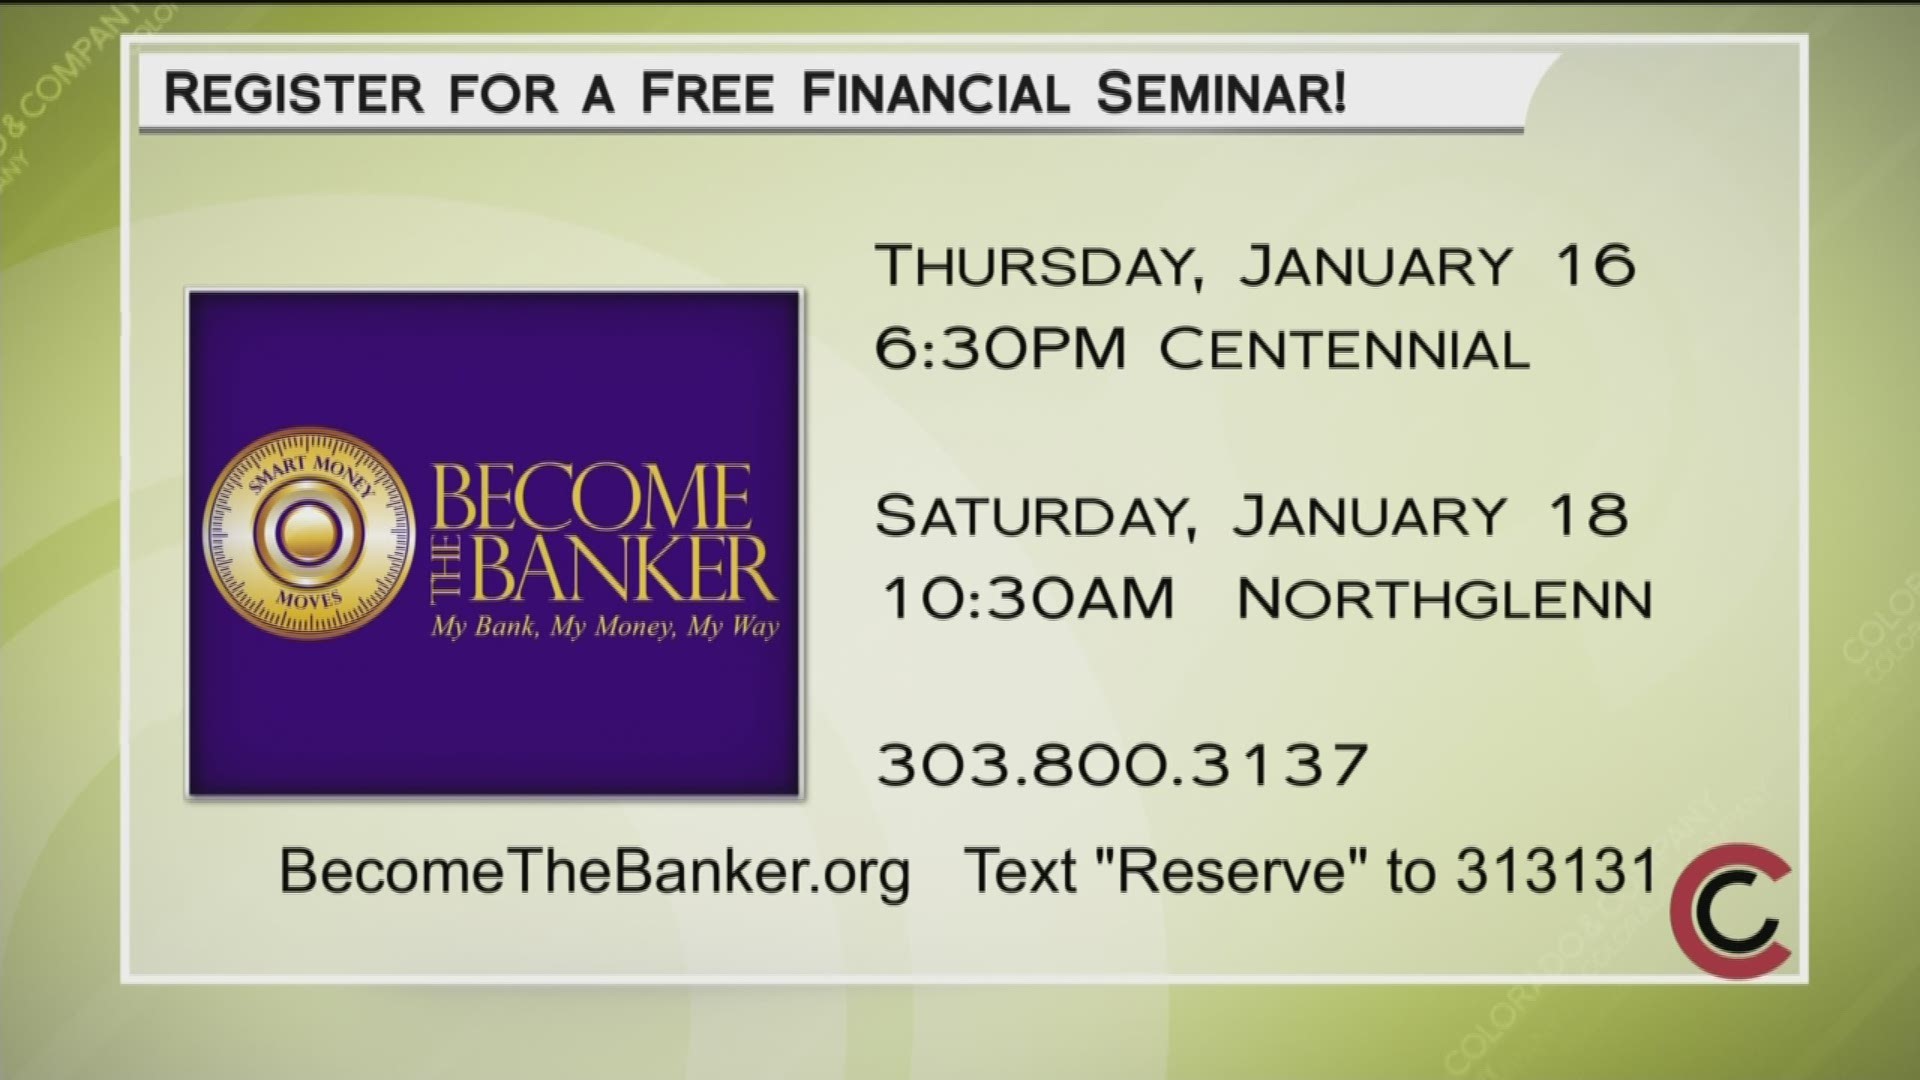 Learn how you can start your new year off right with a free financial seminar—January 16th or 18th. Call 303.800.3137 or visit BecomeTheBanker.org/Register.